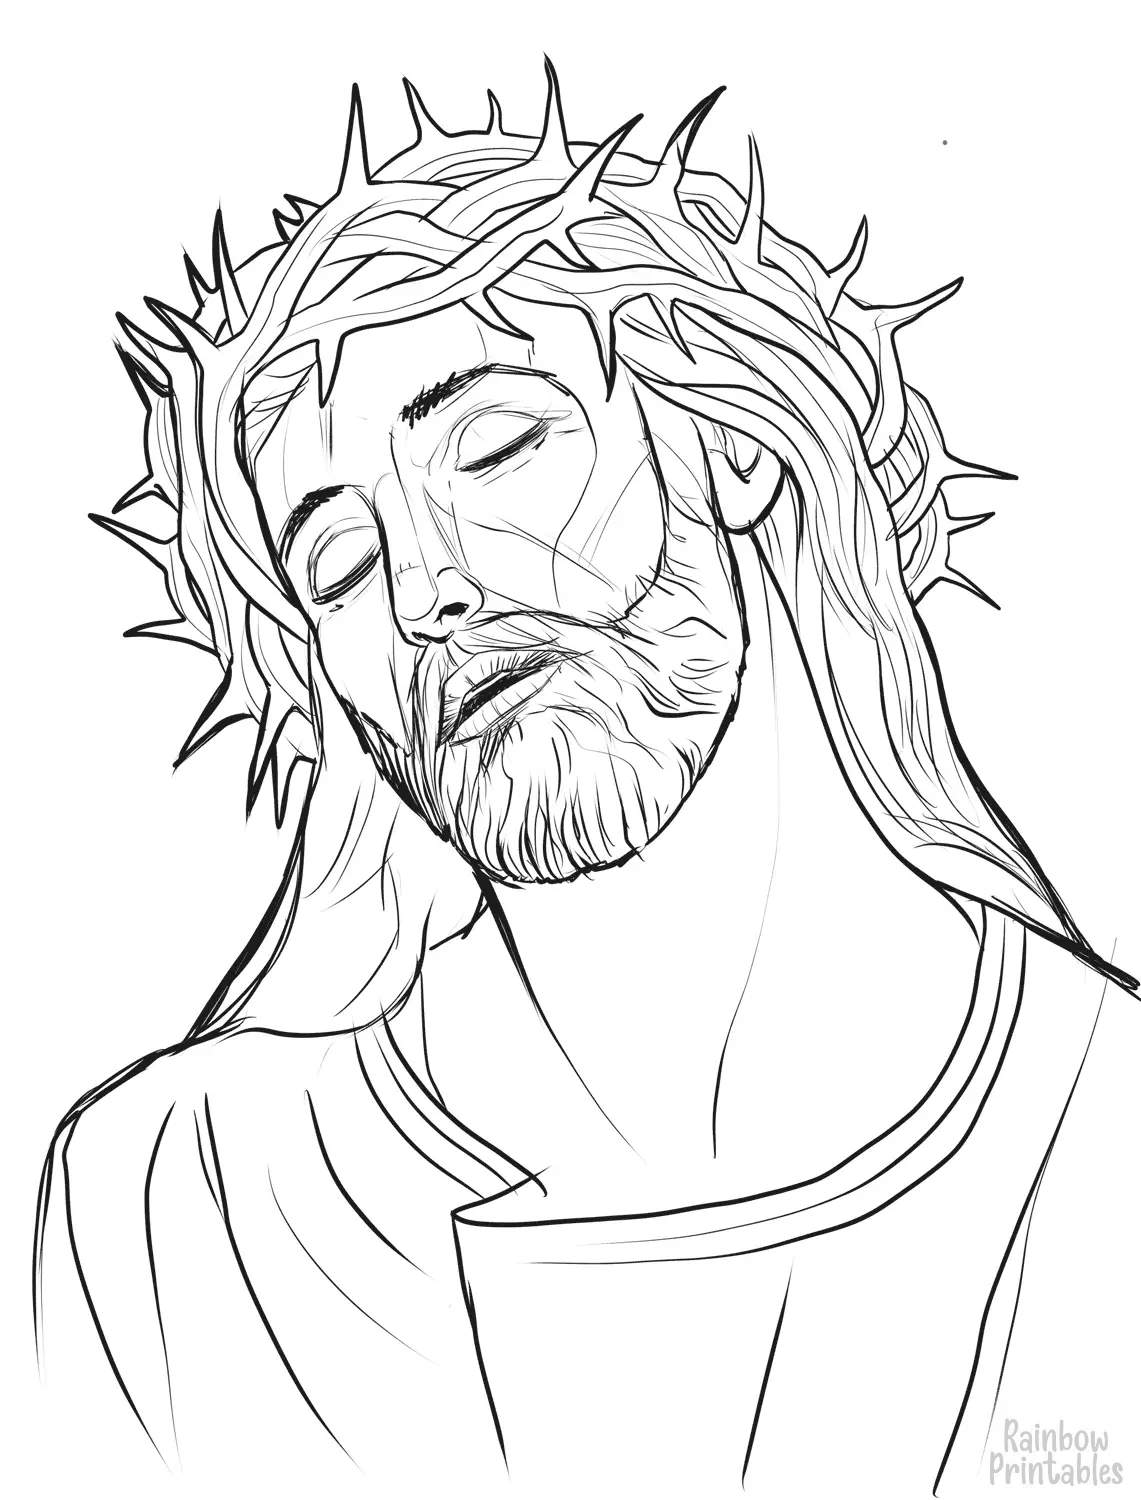 Line-Drawing-religious-christian-classic-jesus-holding-lamb-coloring-page-for-children